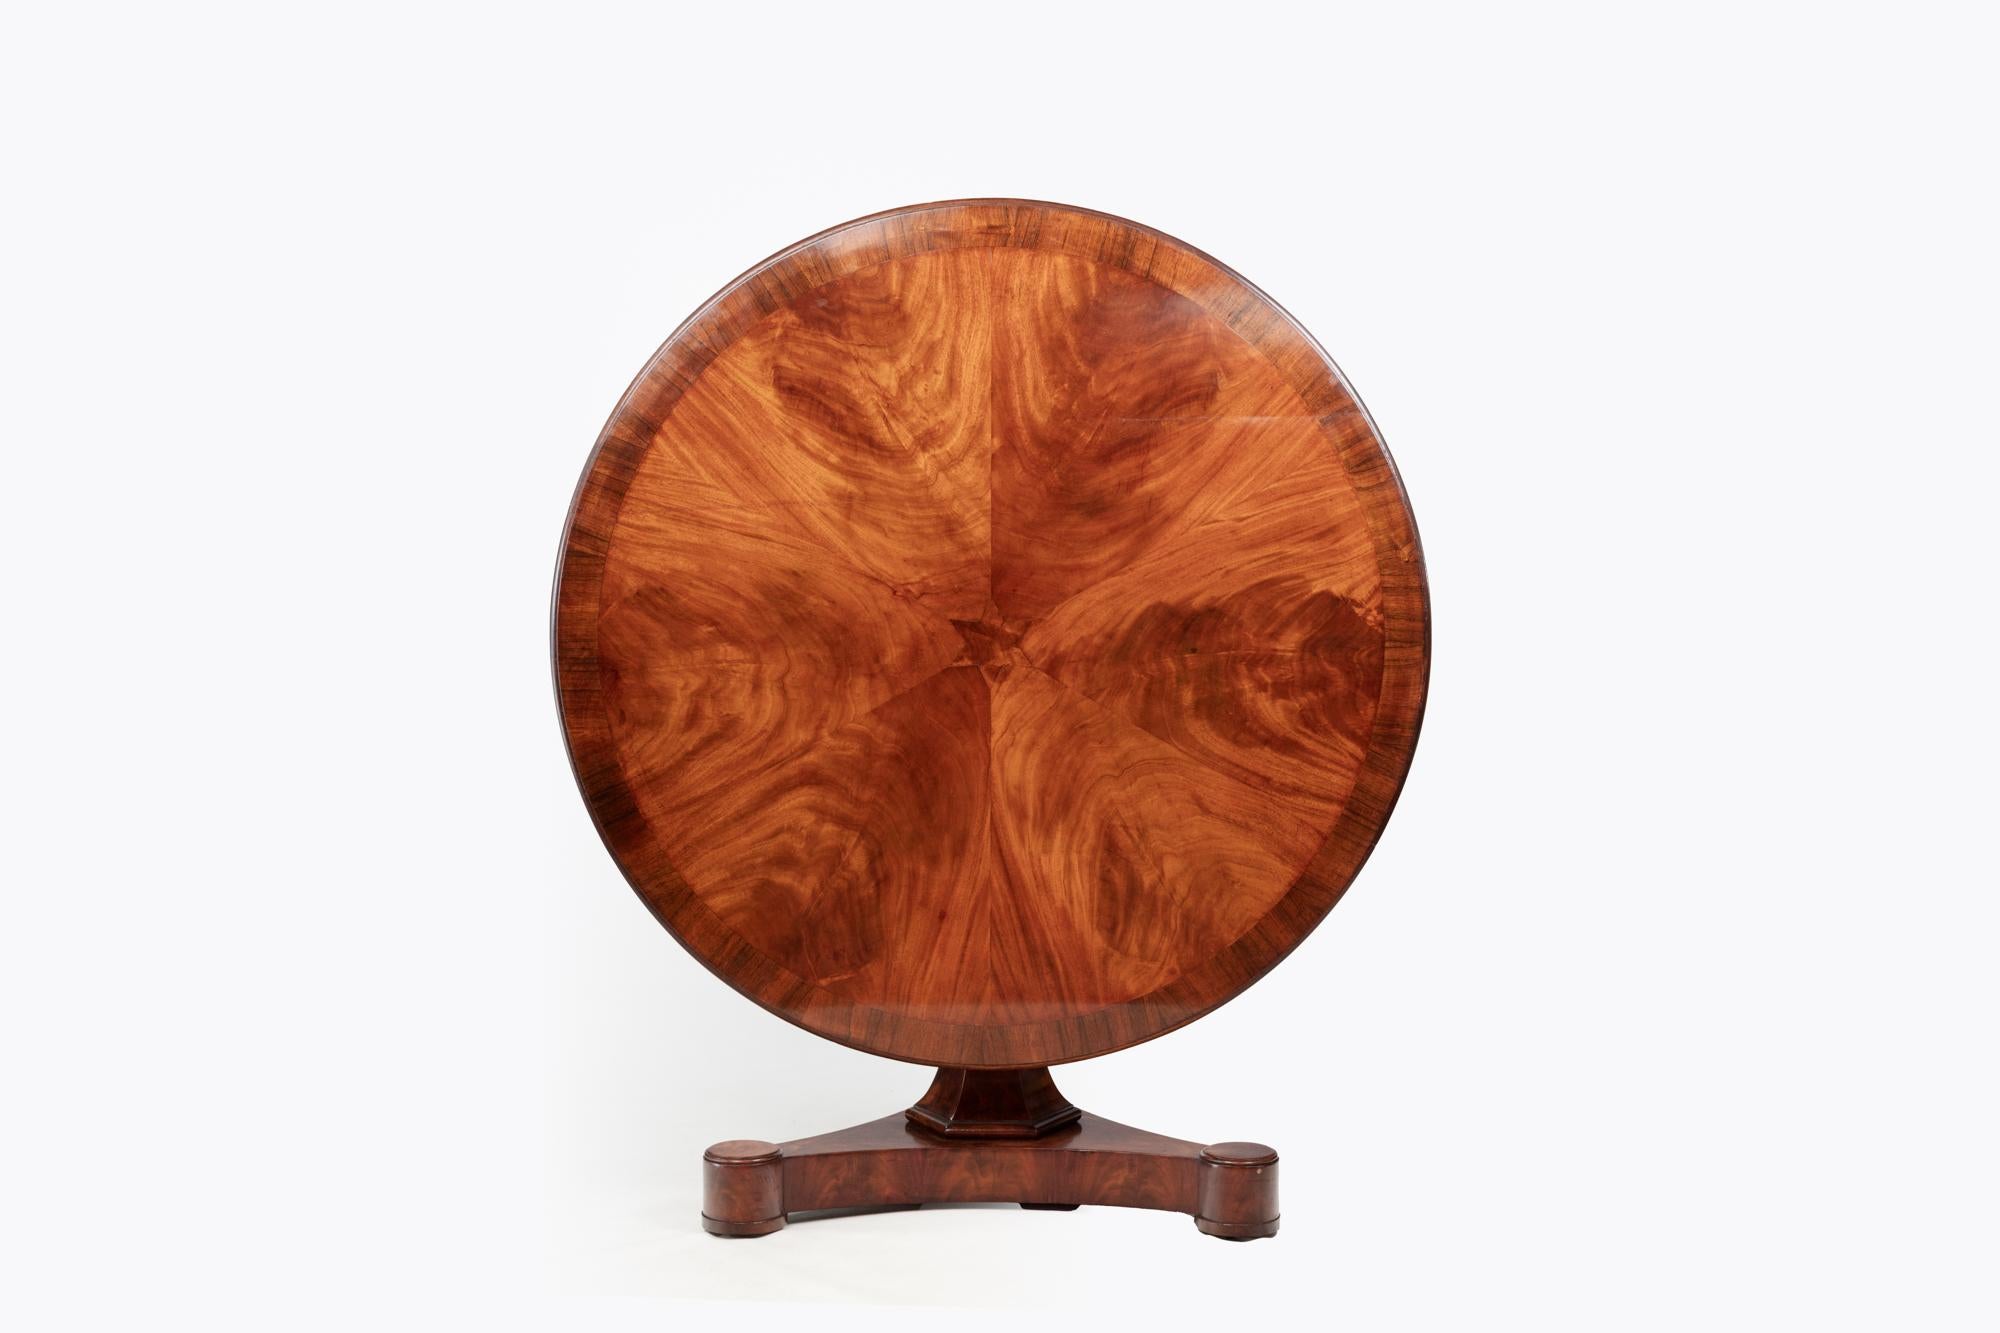 19th Century William IV feathered mahogany circular pod table with central inlaid star and crossbanding detail to the outer edge. The top sits above a pod platform base. Circa 1830.

Stamped Gillington with a registration number 9375.

The brothers